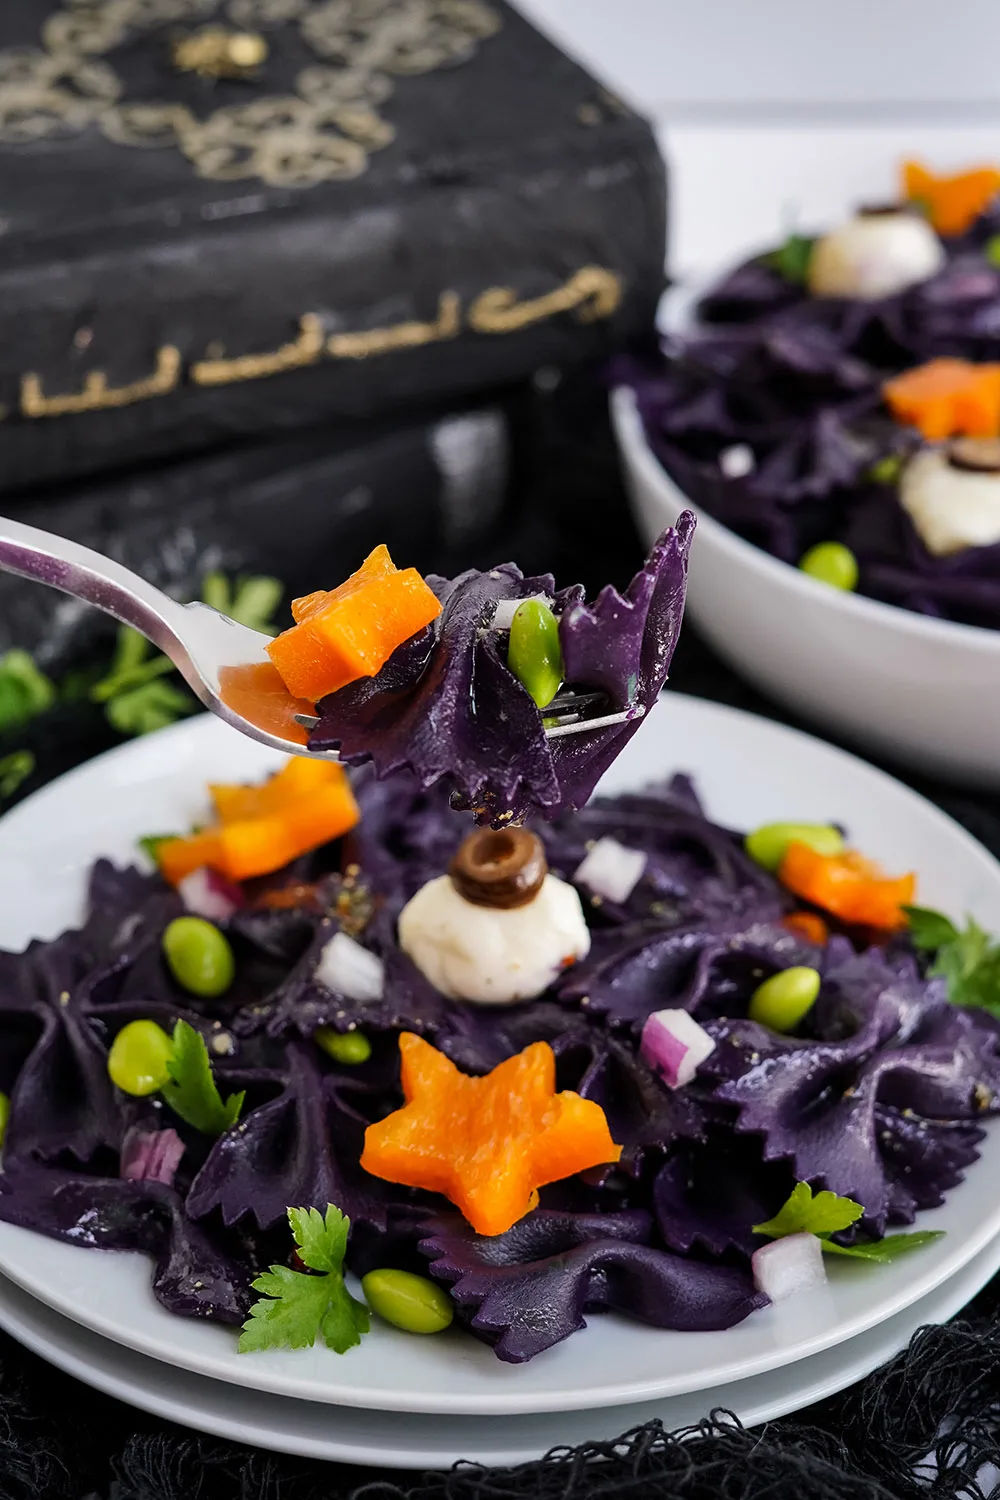 Forkful of black pasta salad with the bowl in the background.